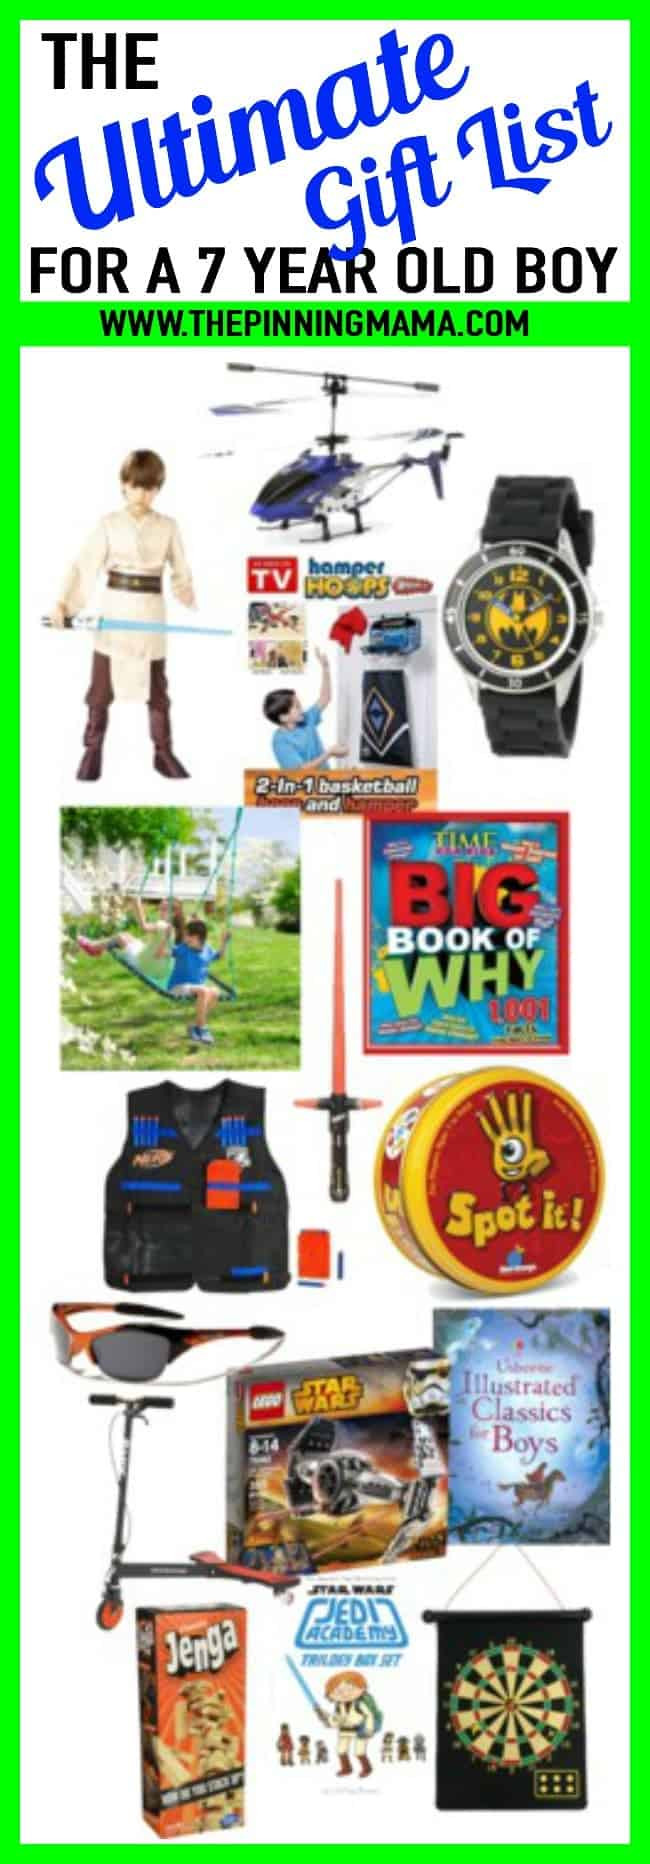 7 Year Old Boy Christmas Gift Ideas
 BEST Gift Ideas for a 7 Year Old Boy • The Pinning Mama